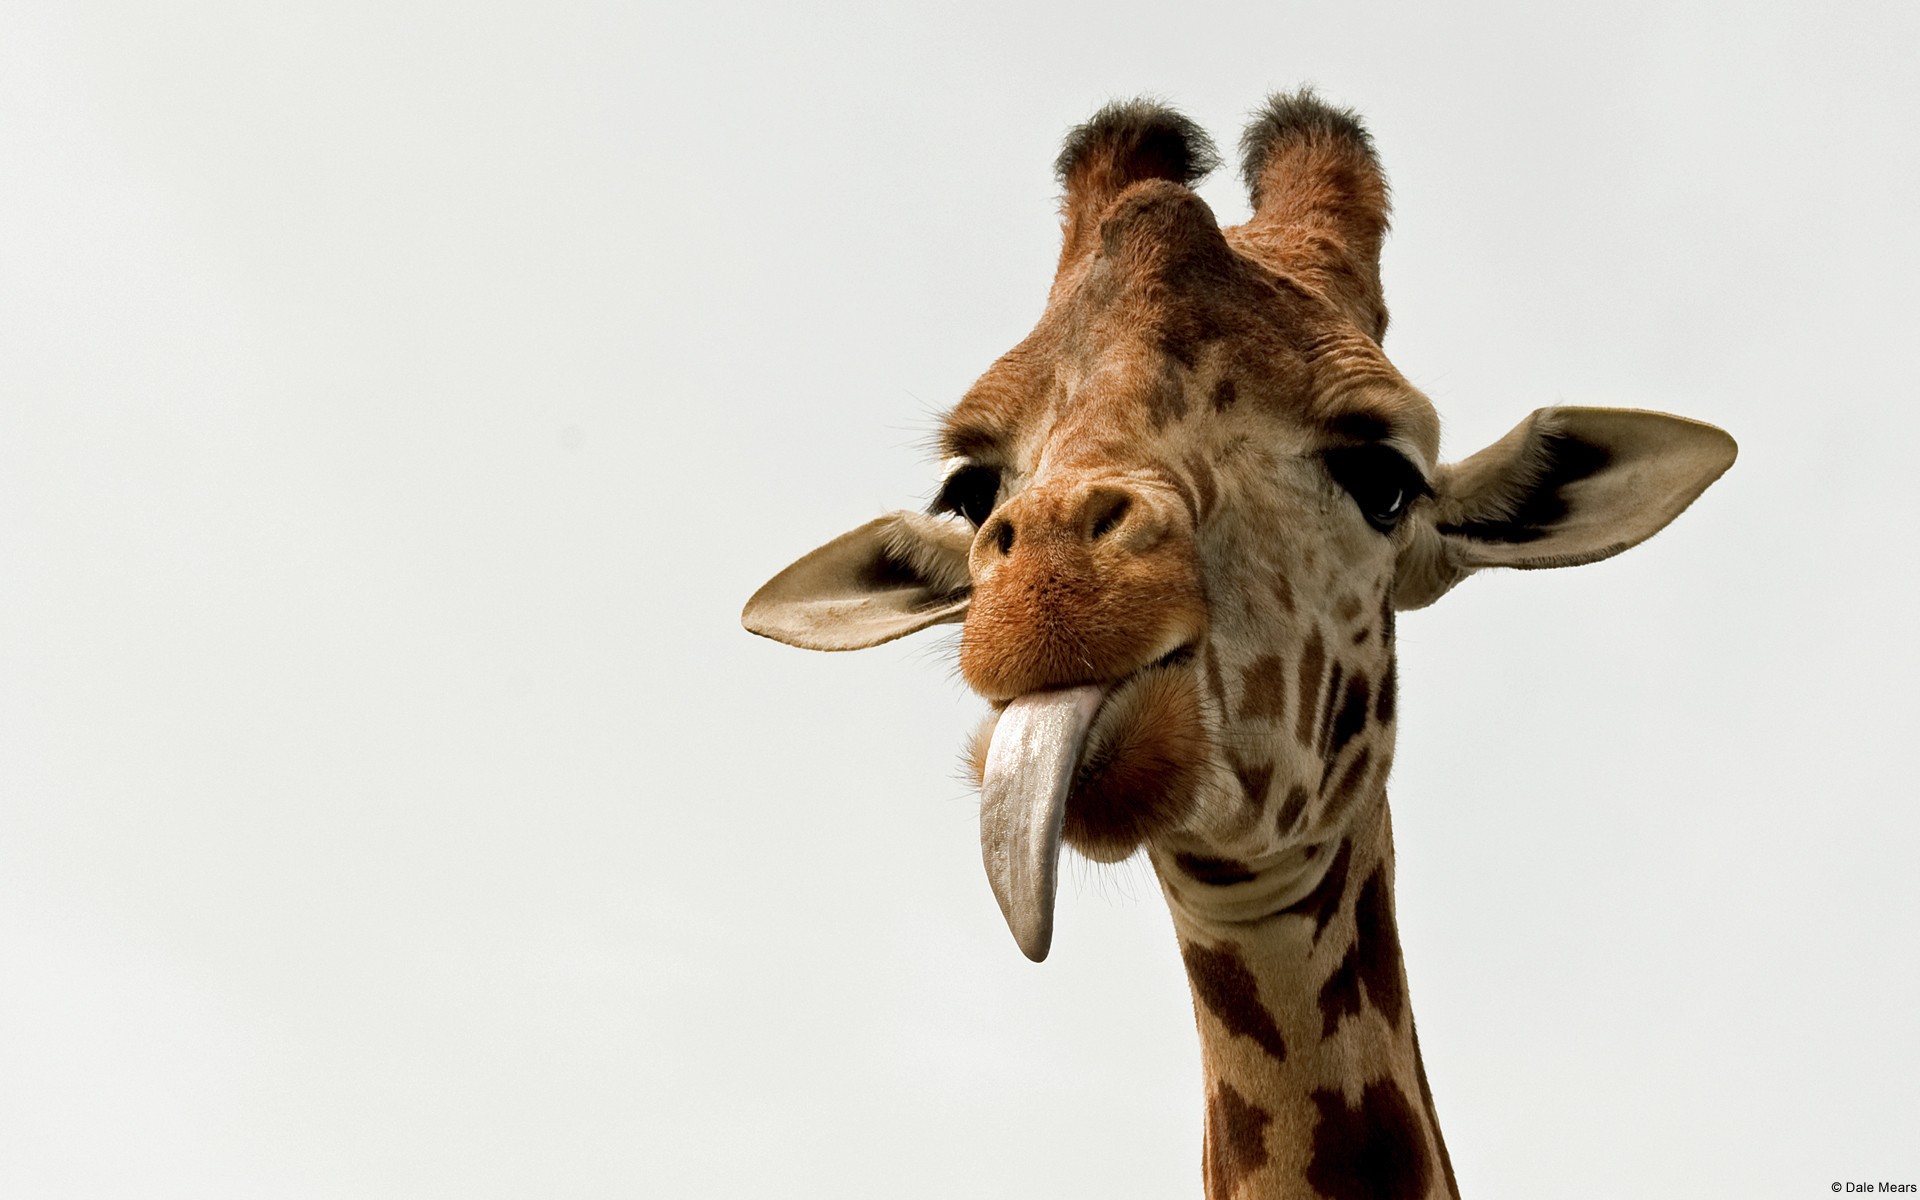 General 1920x1200 animals giraffes mammals tongue out simple background watermarked